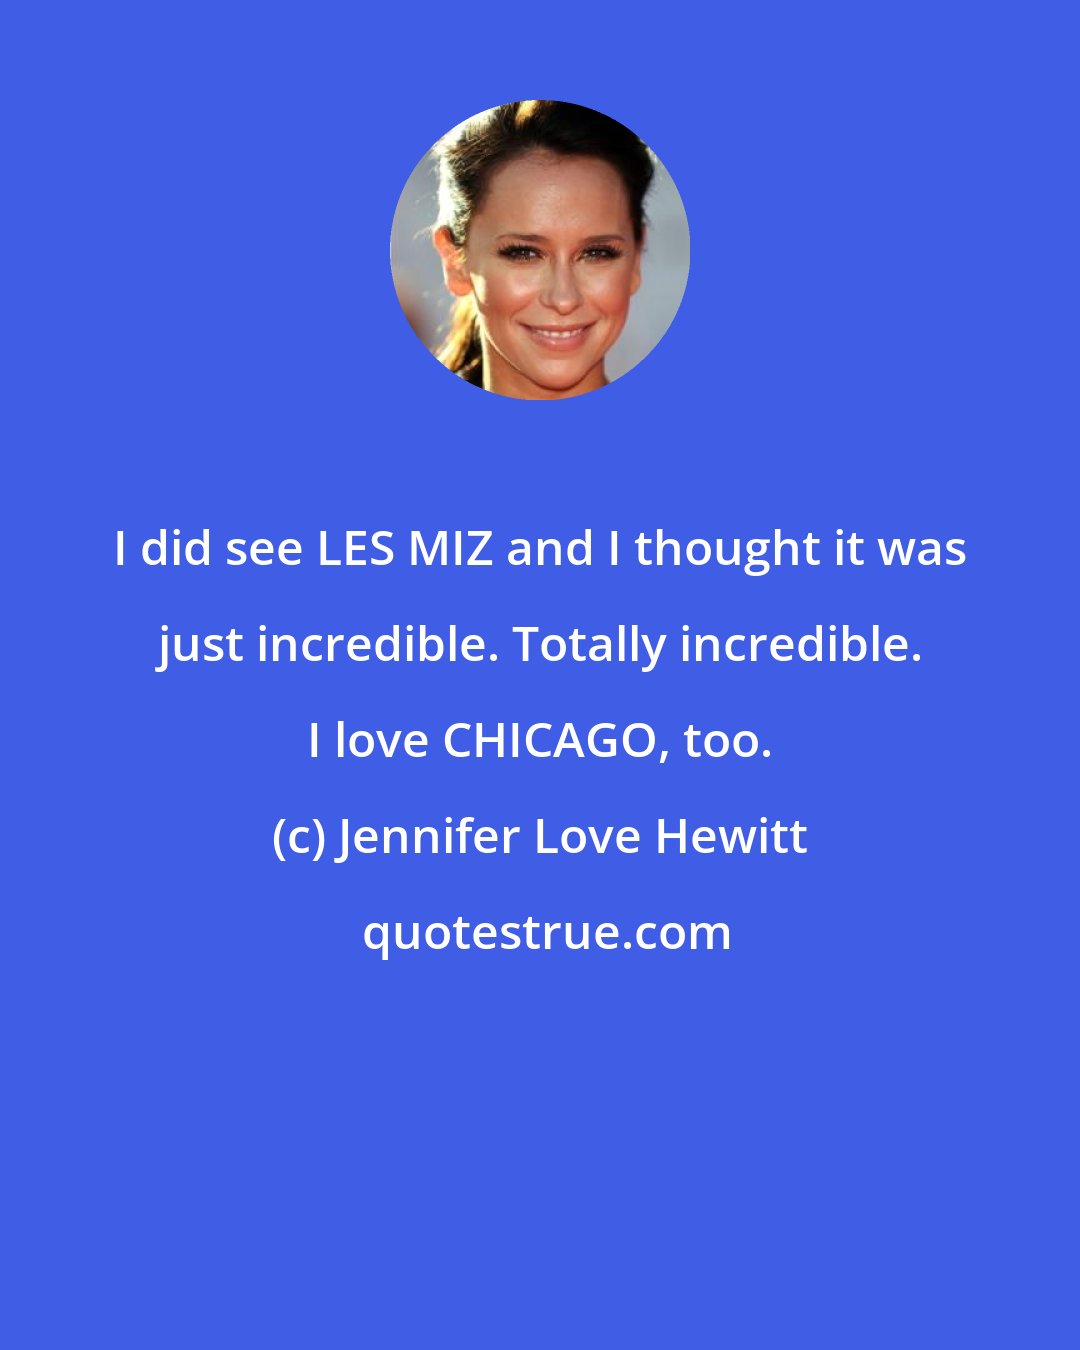 Jennifer Love Hewitt: I did see LES MIZ and I thought it was just incredible. Totally incredible. I love CHICAGO, too.